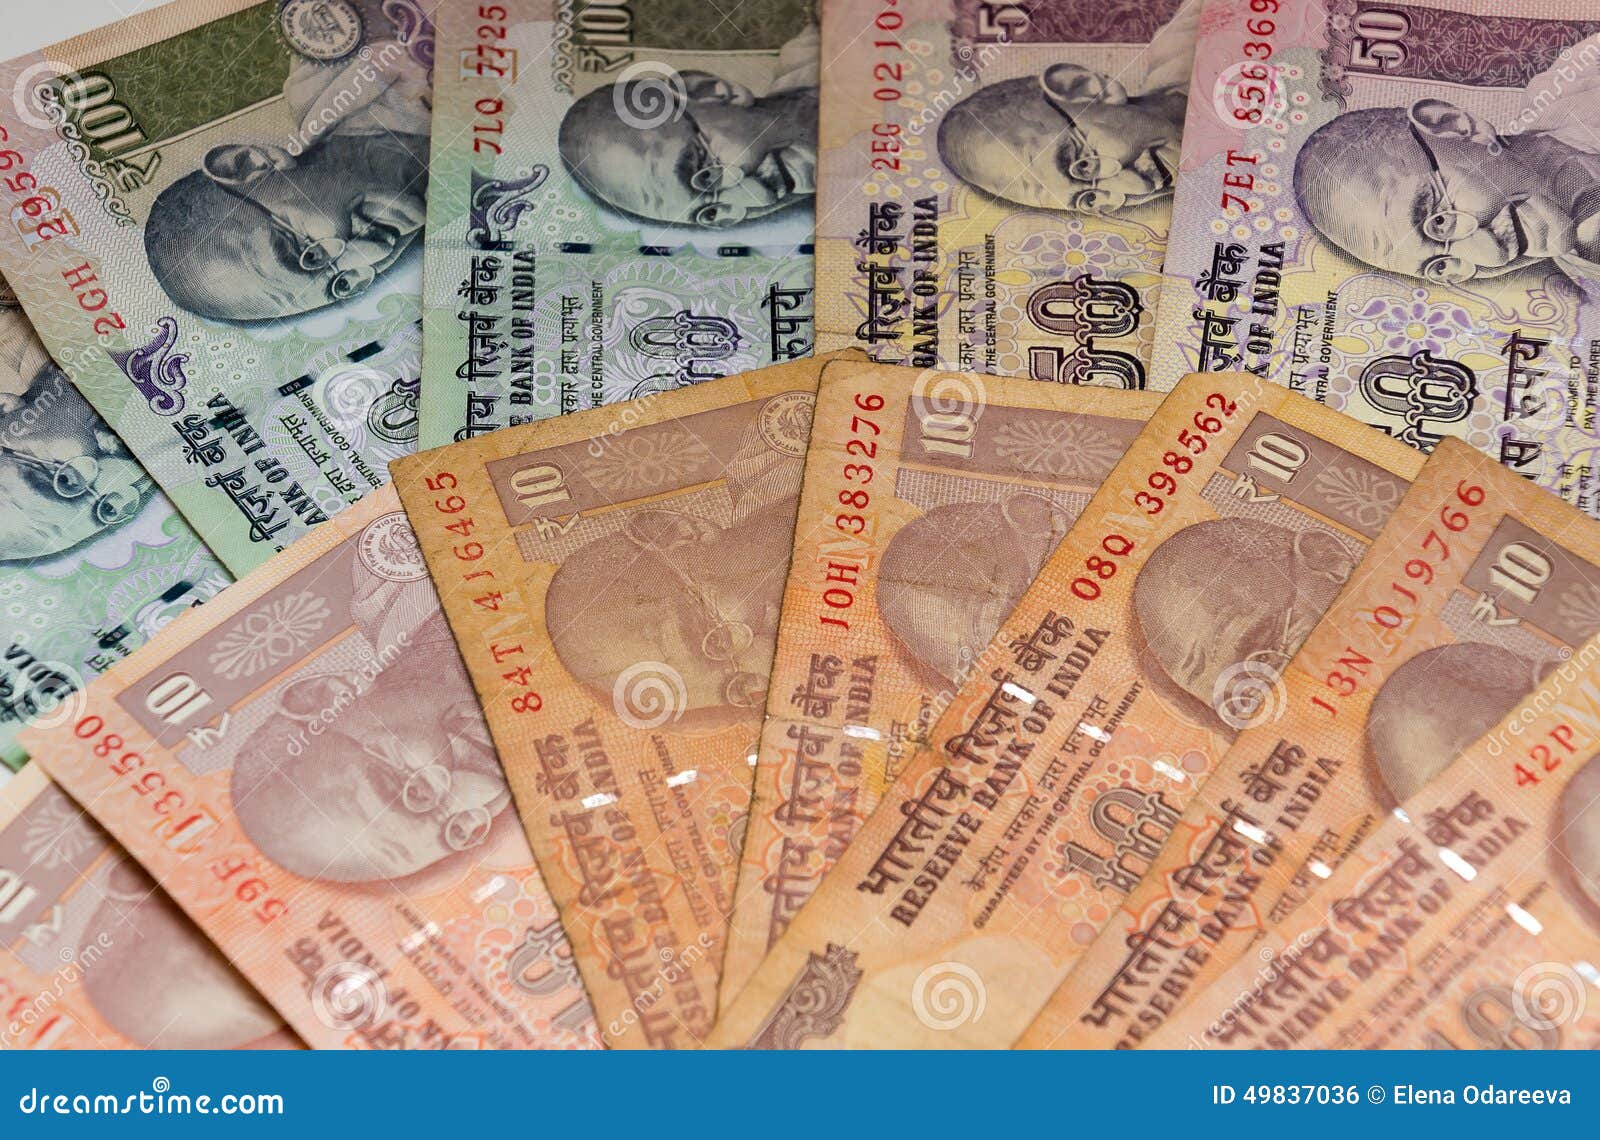 tourist currency rates indian rupee